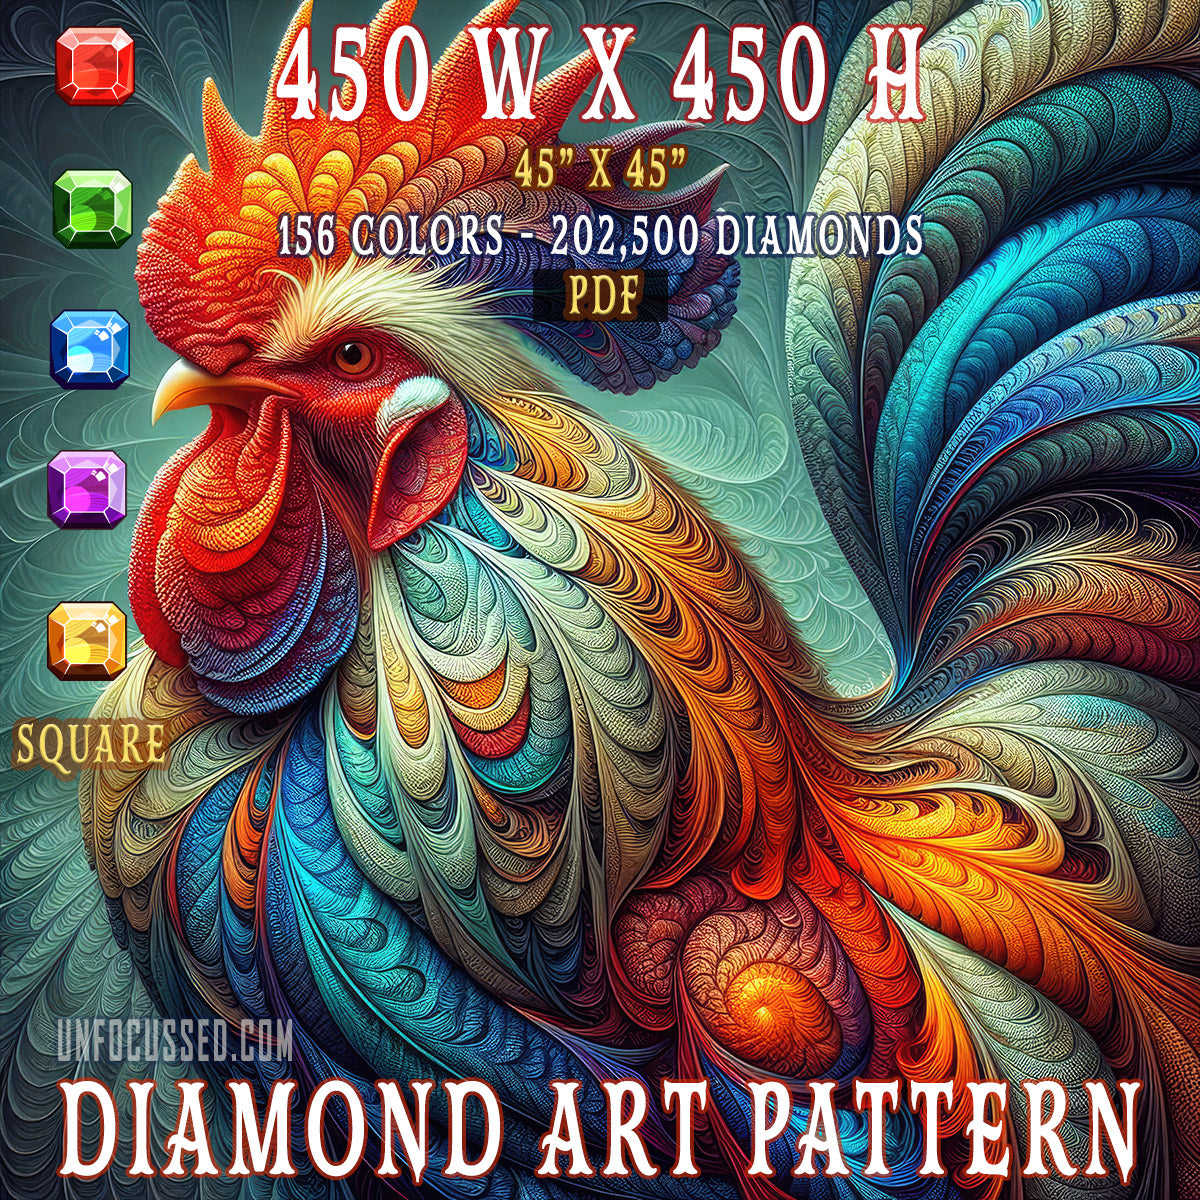 The Regal Acanthus Rooster Diamond Art Pattern